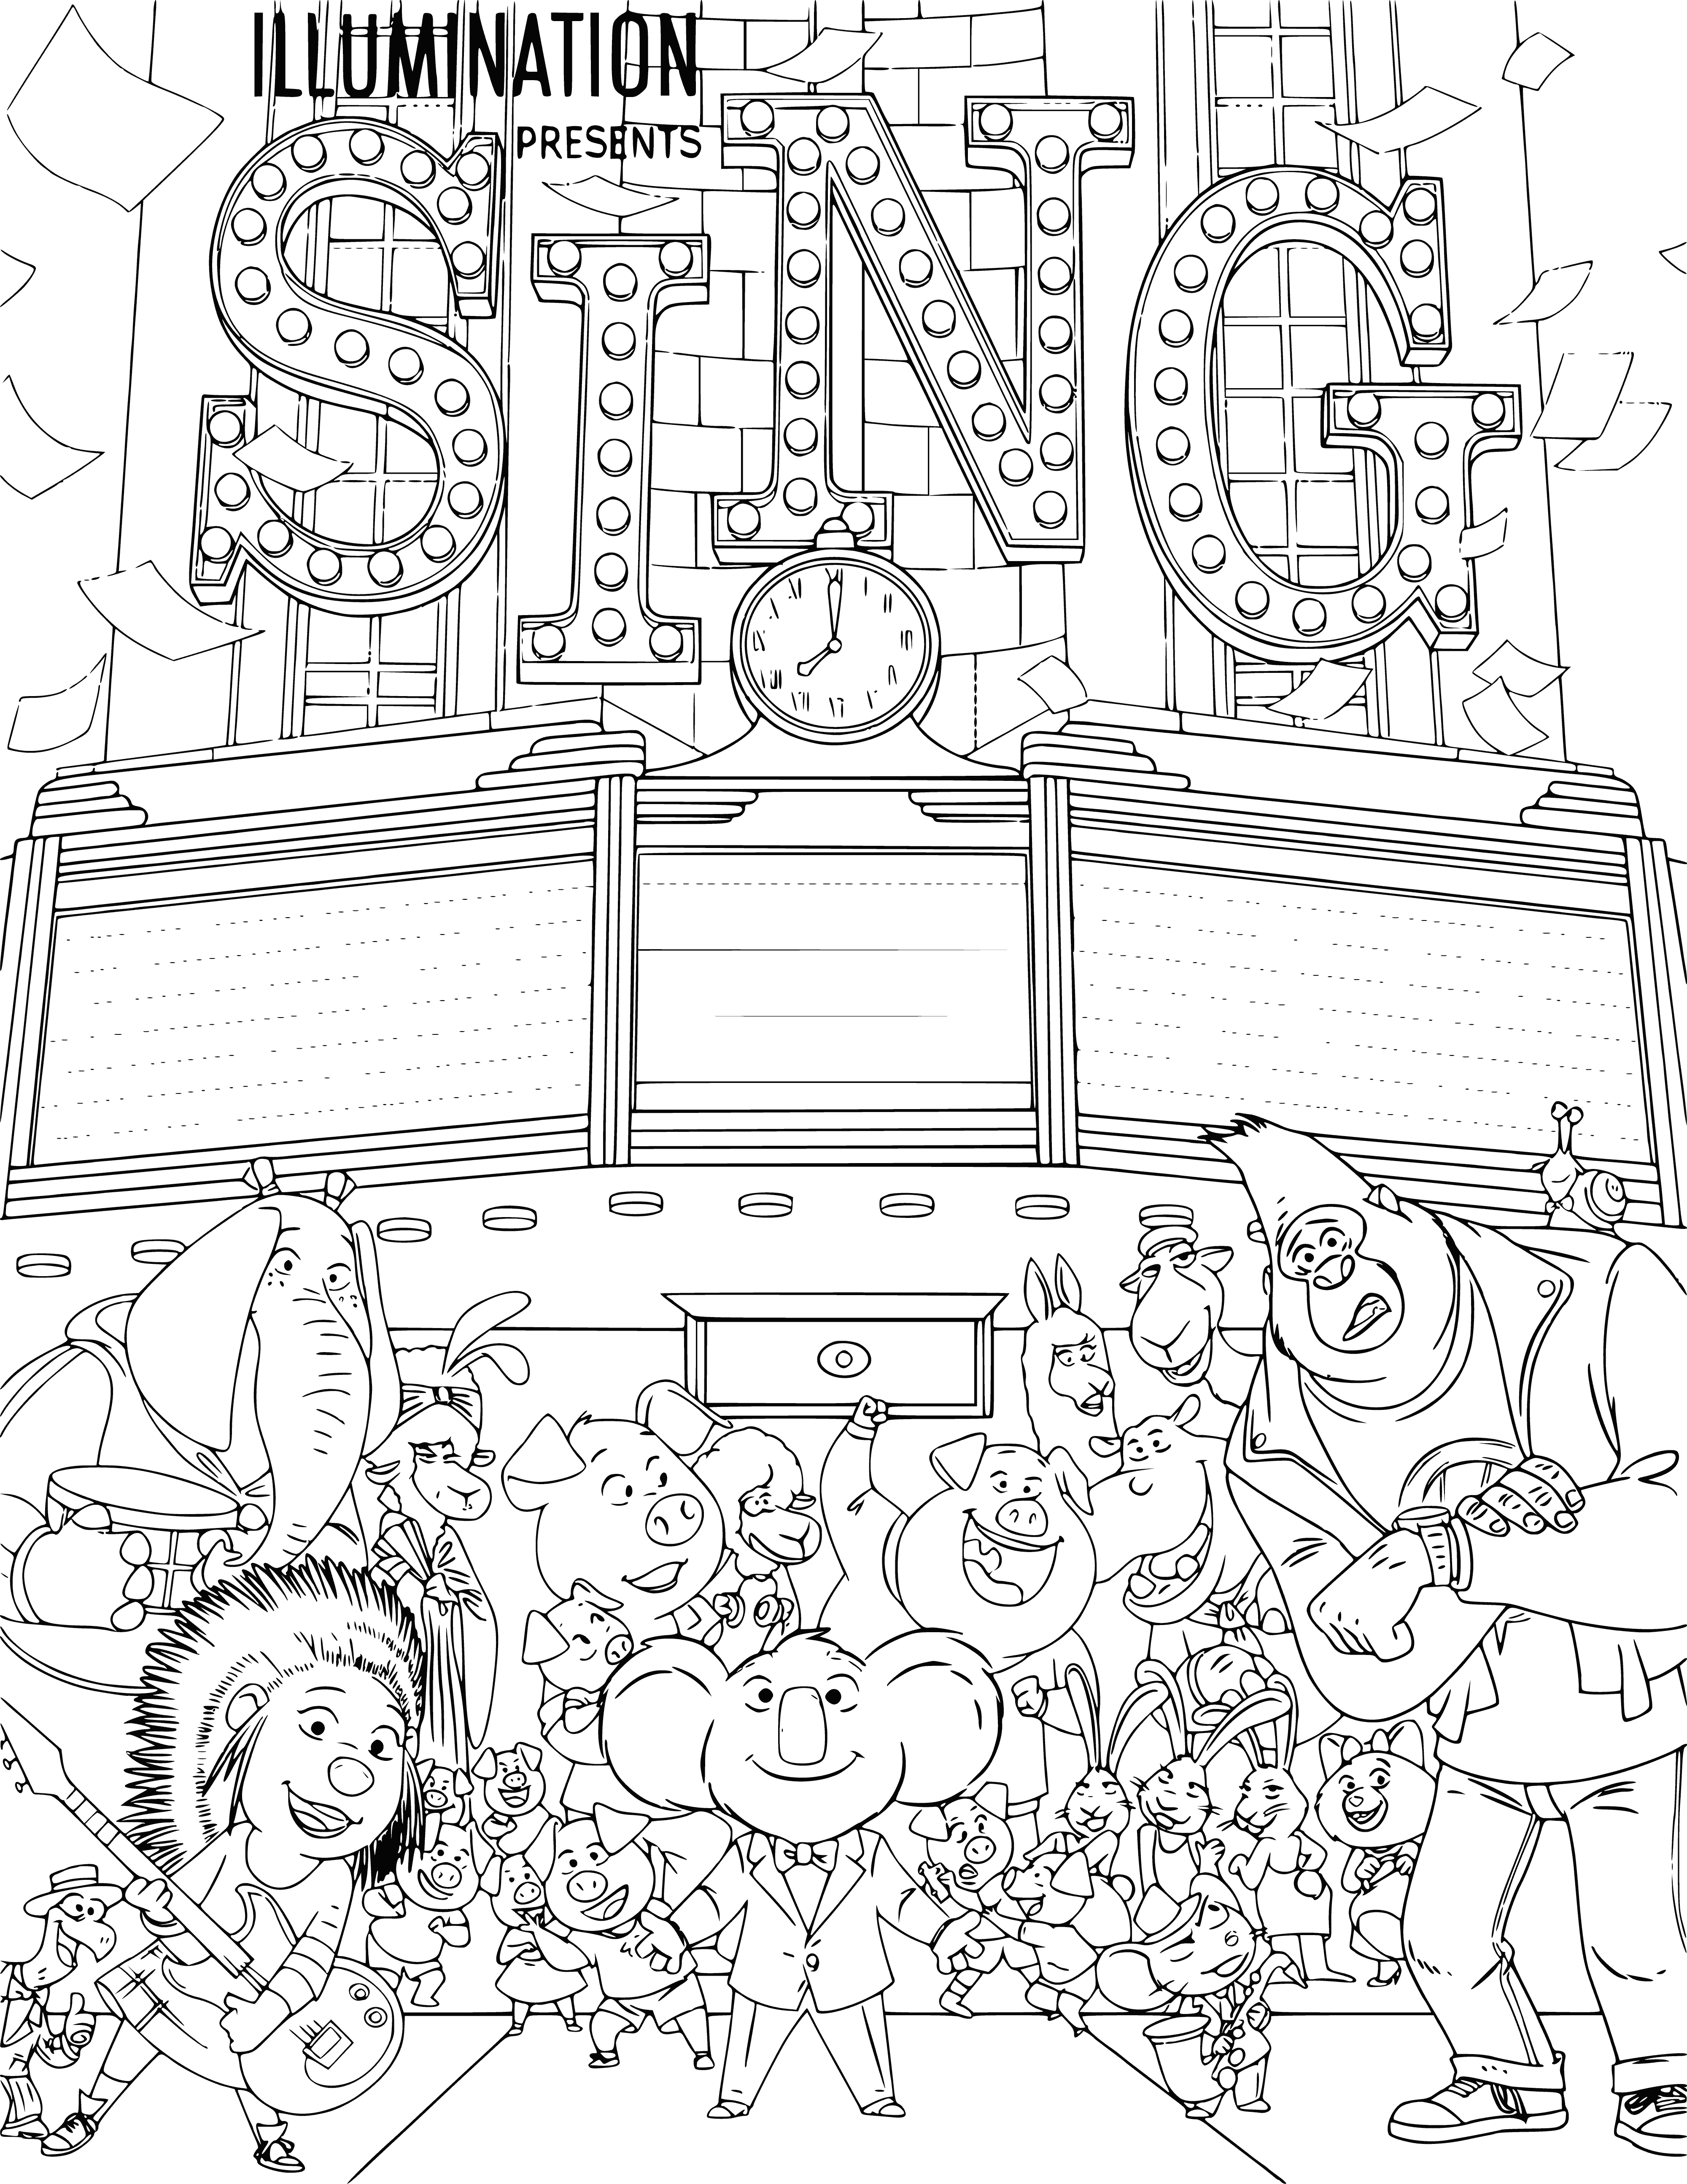 coloring page: Mice, bird, & frog sing on stage wearing hats/ties; frog wears jacket/hat.